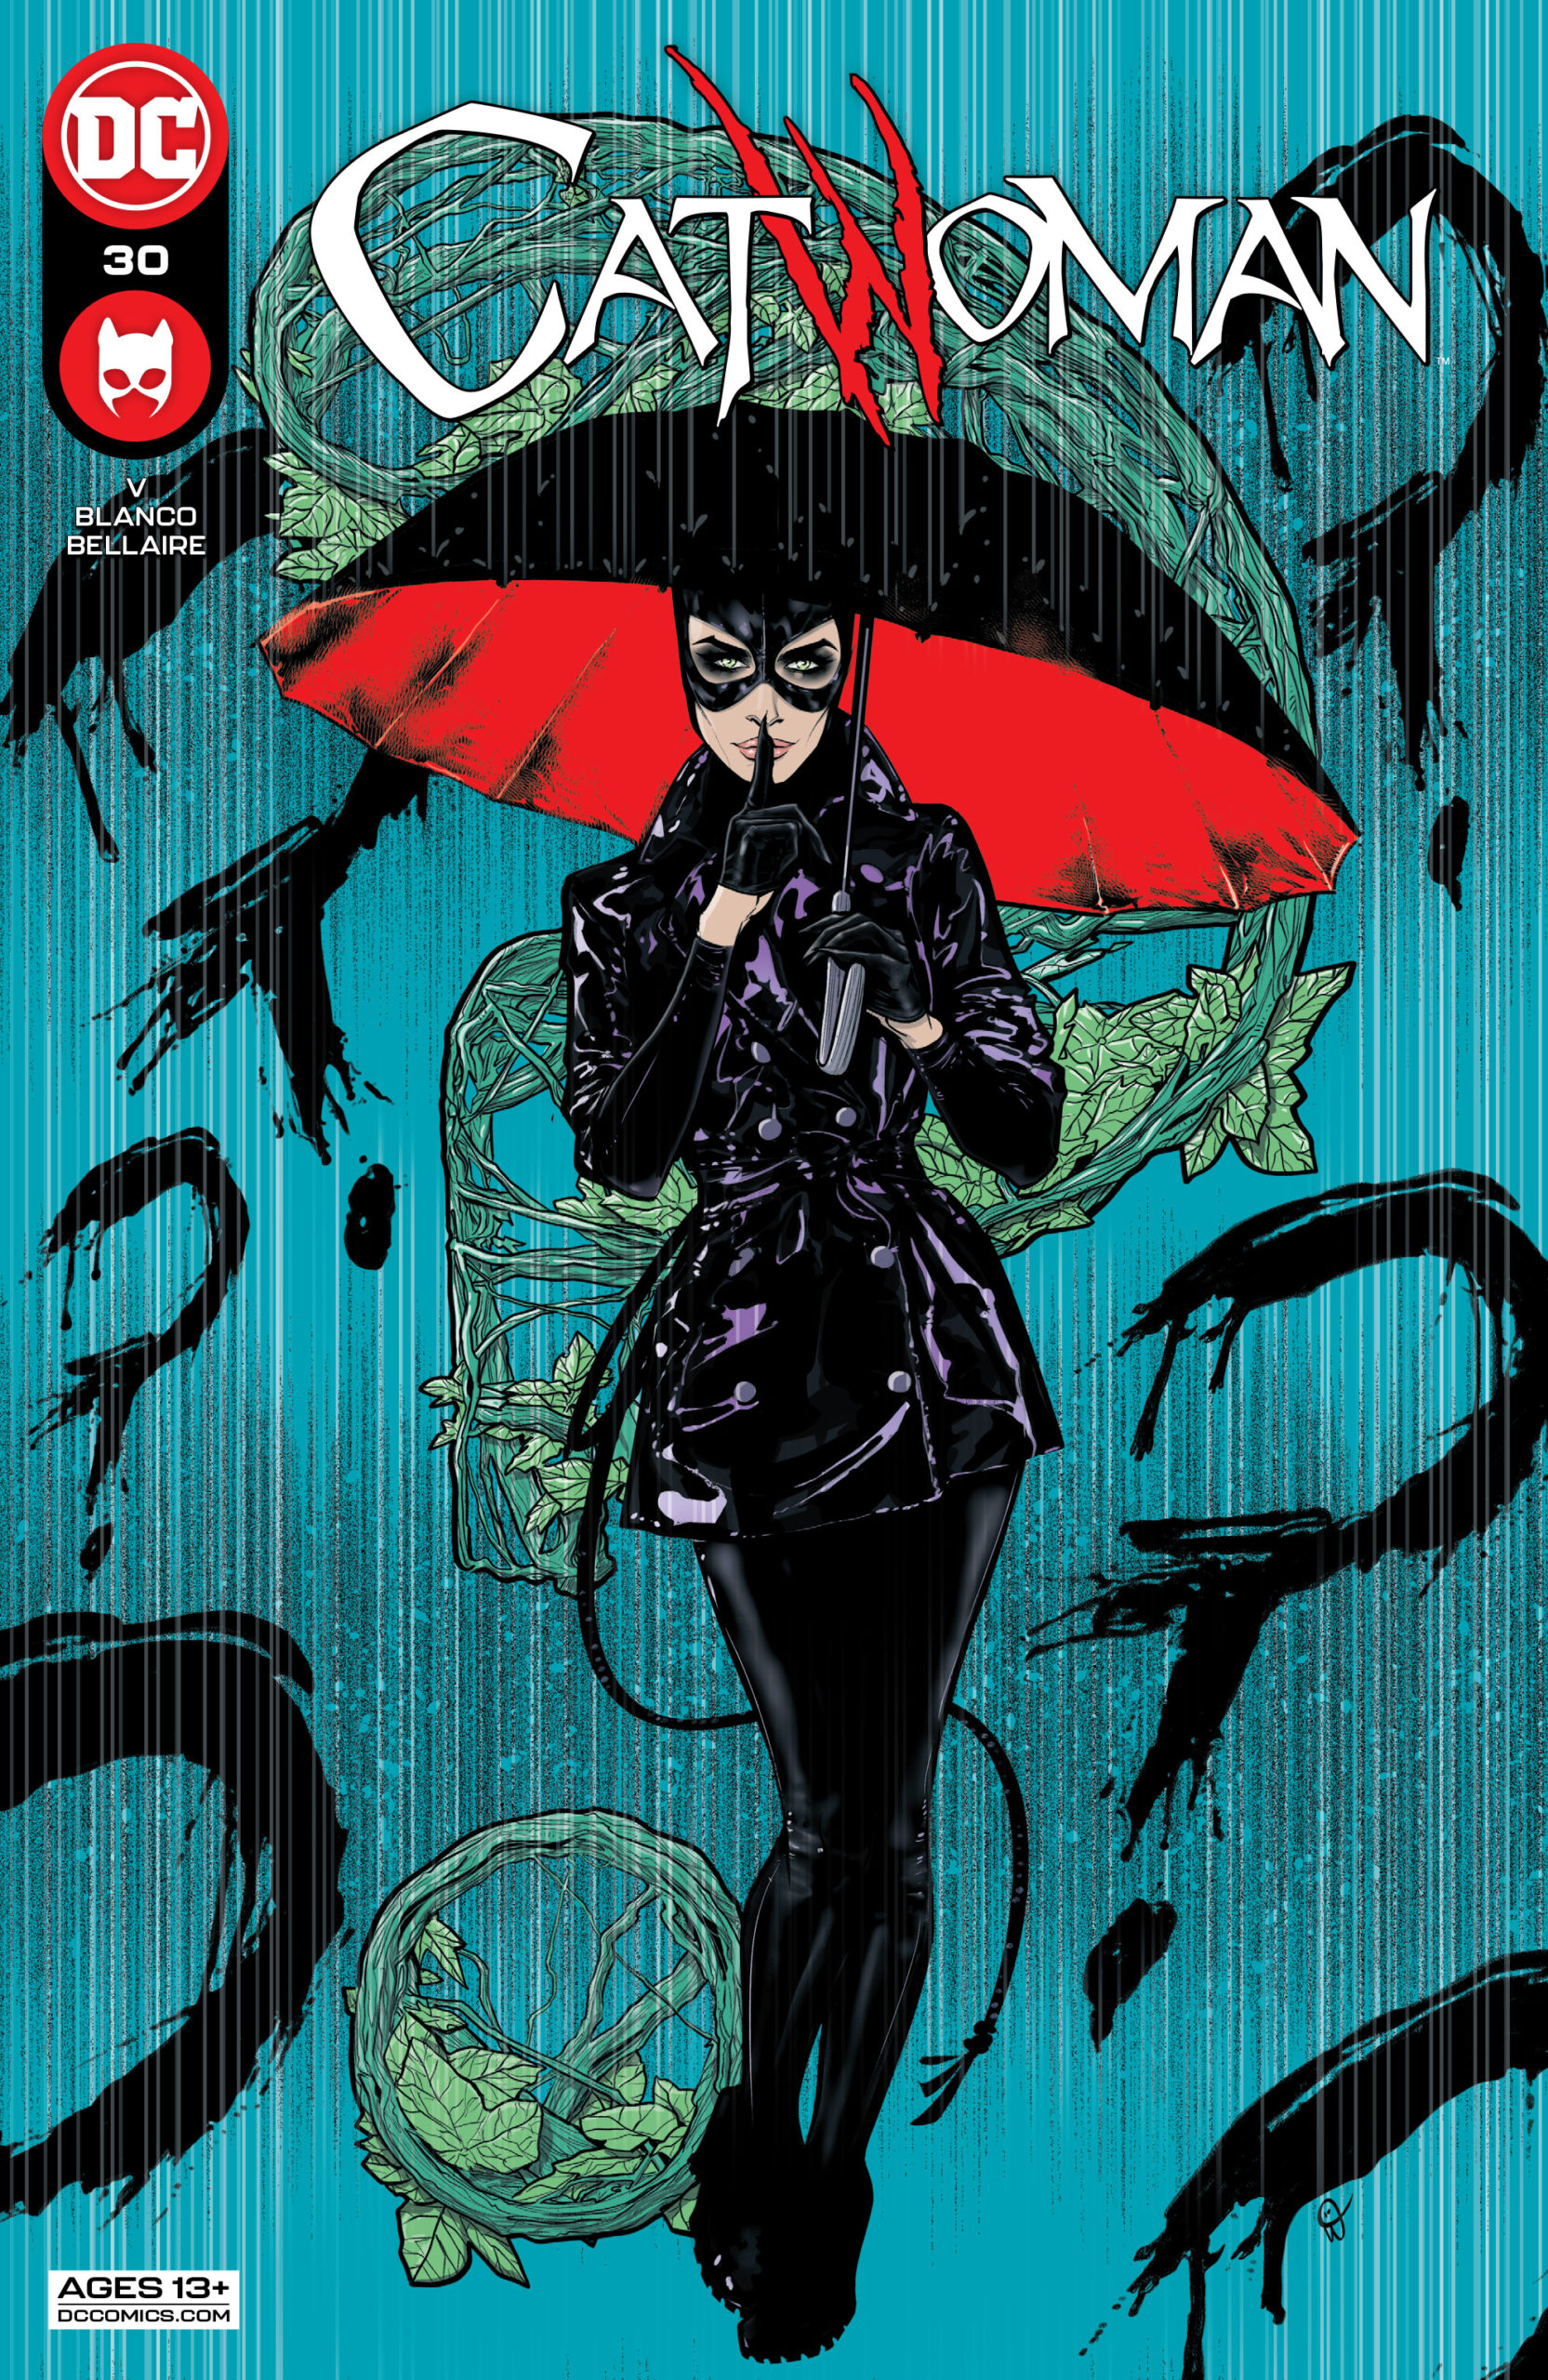 Review: Catwoman #30